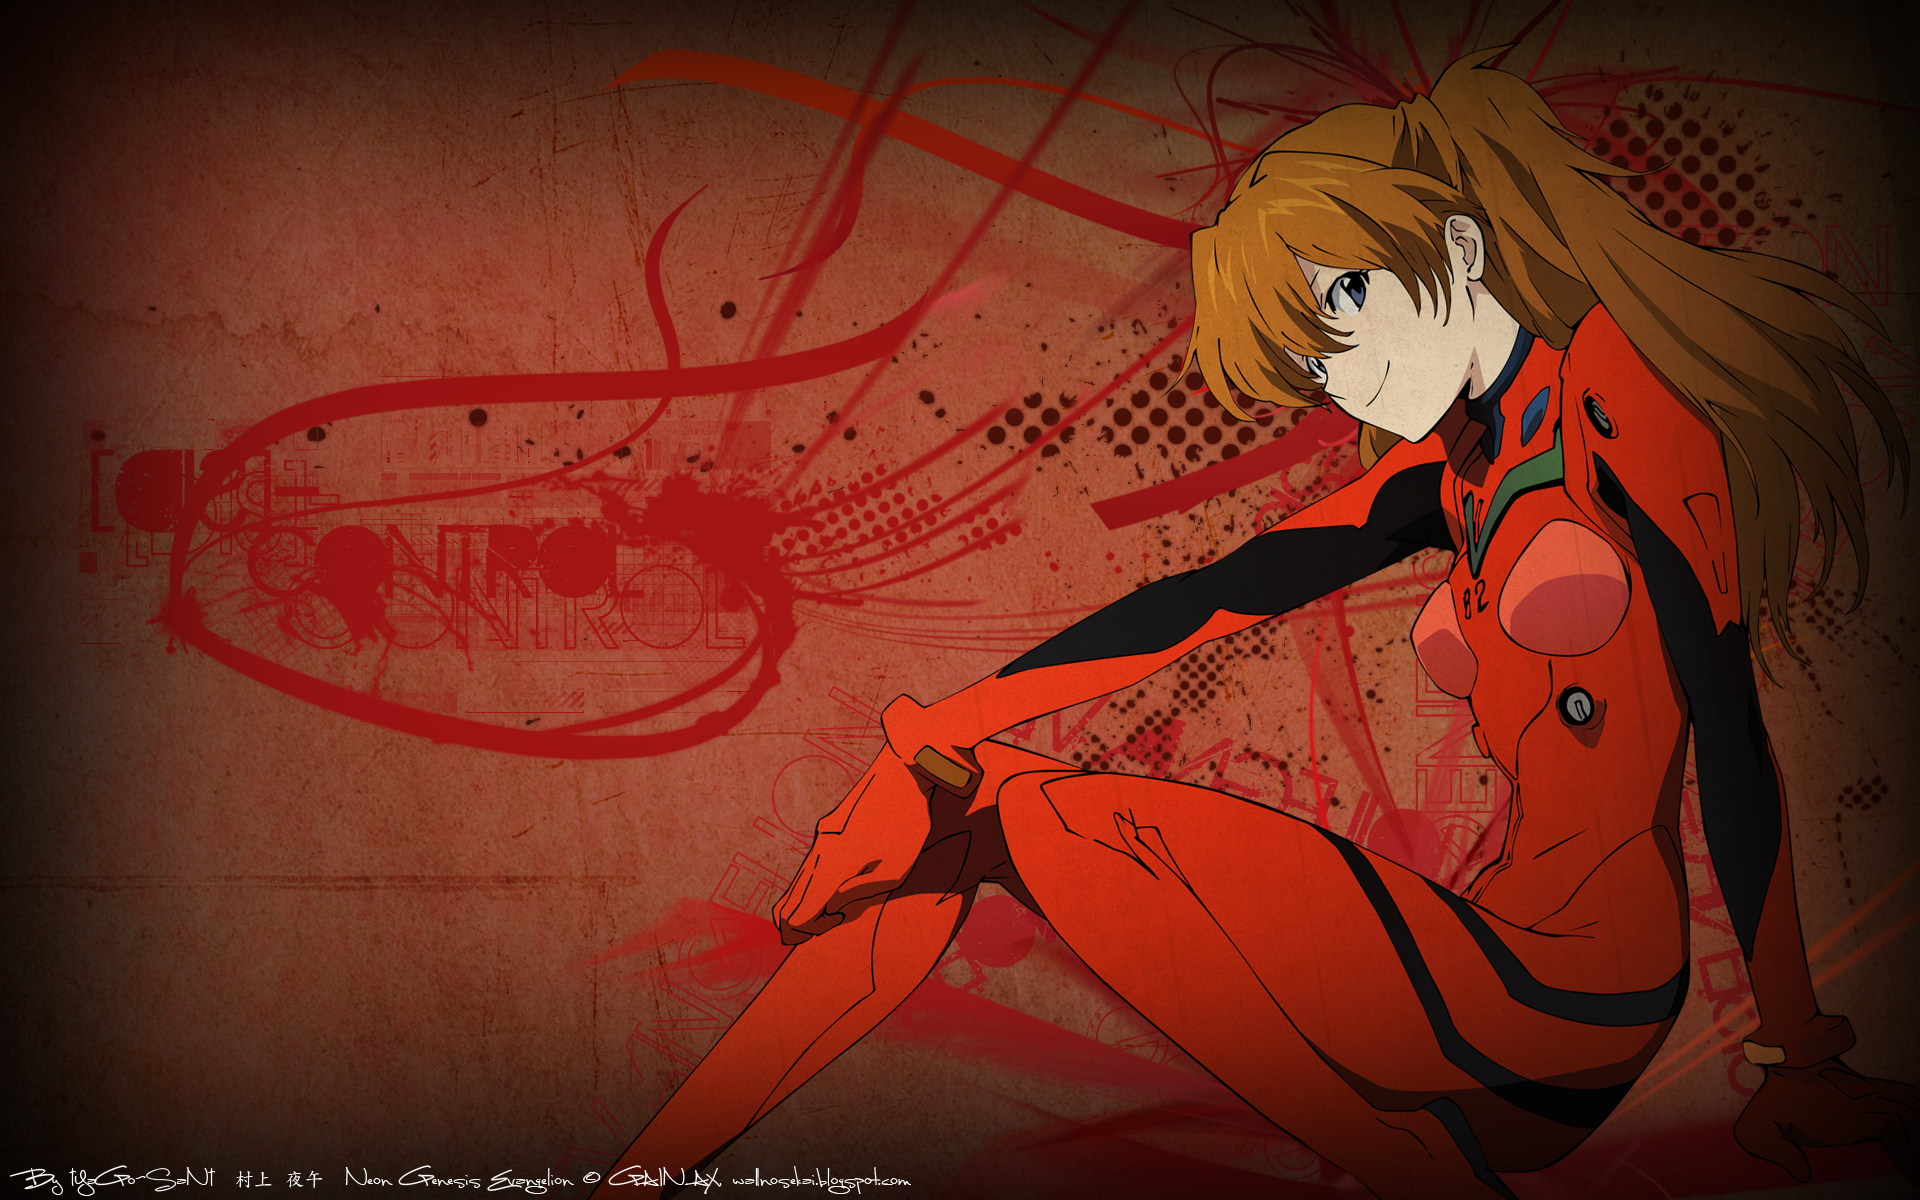 Anime Evangelion: 2.0 You Can (Not) Advance HD Wallpaper | Background Image